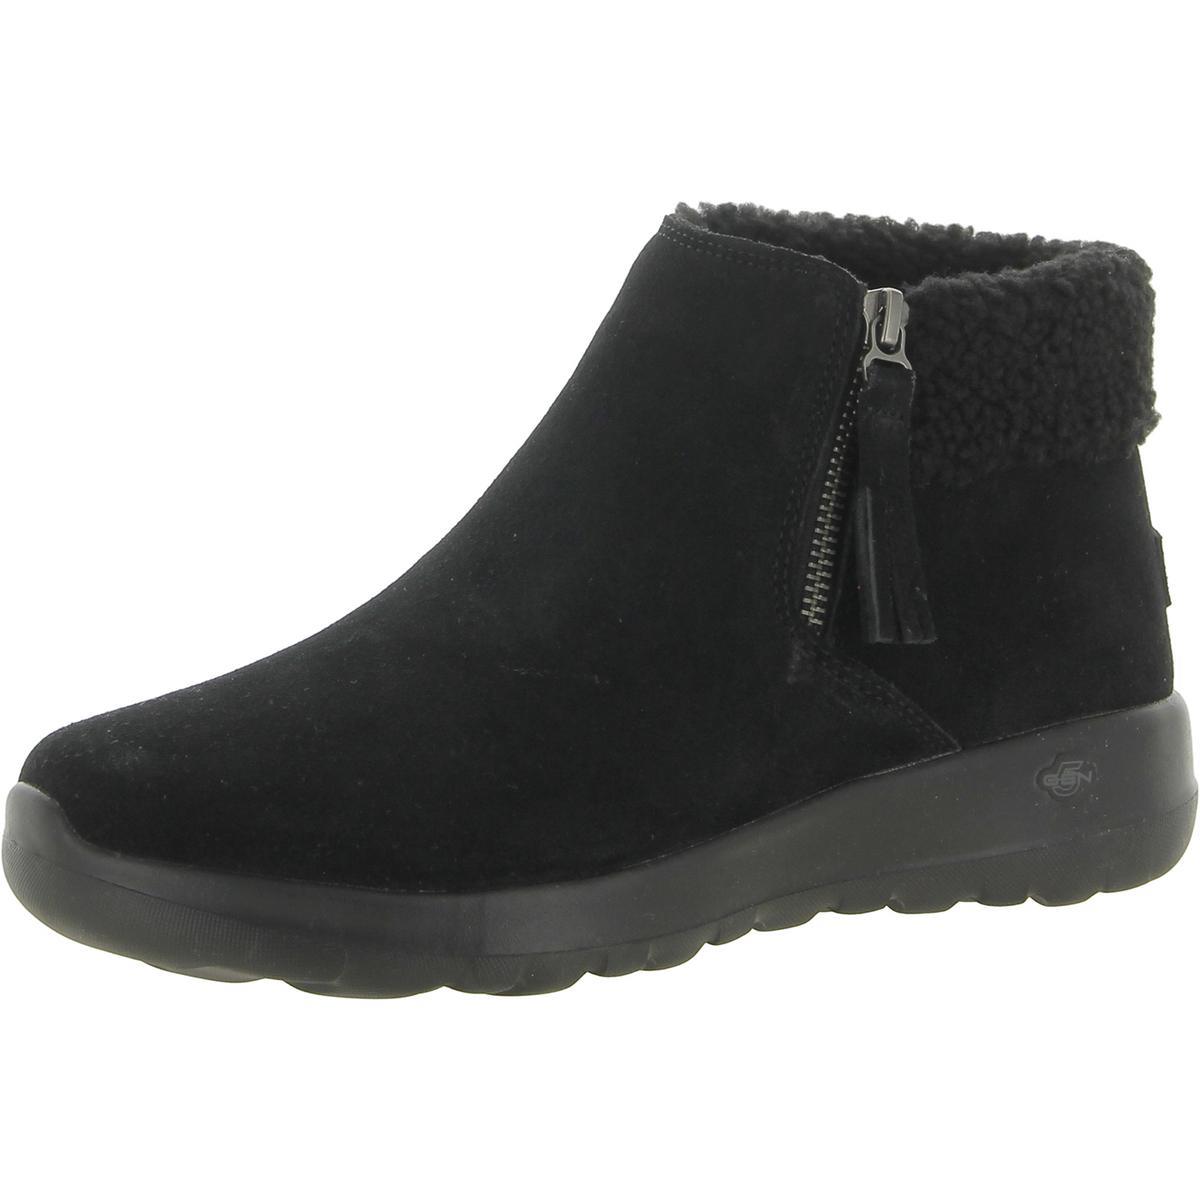 Skechers Womens Happily Cozy Winter Snow Boots Shoes Bhfo 3377 Black